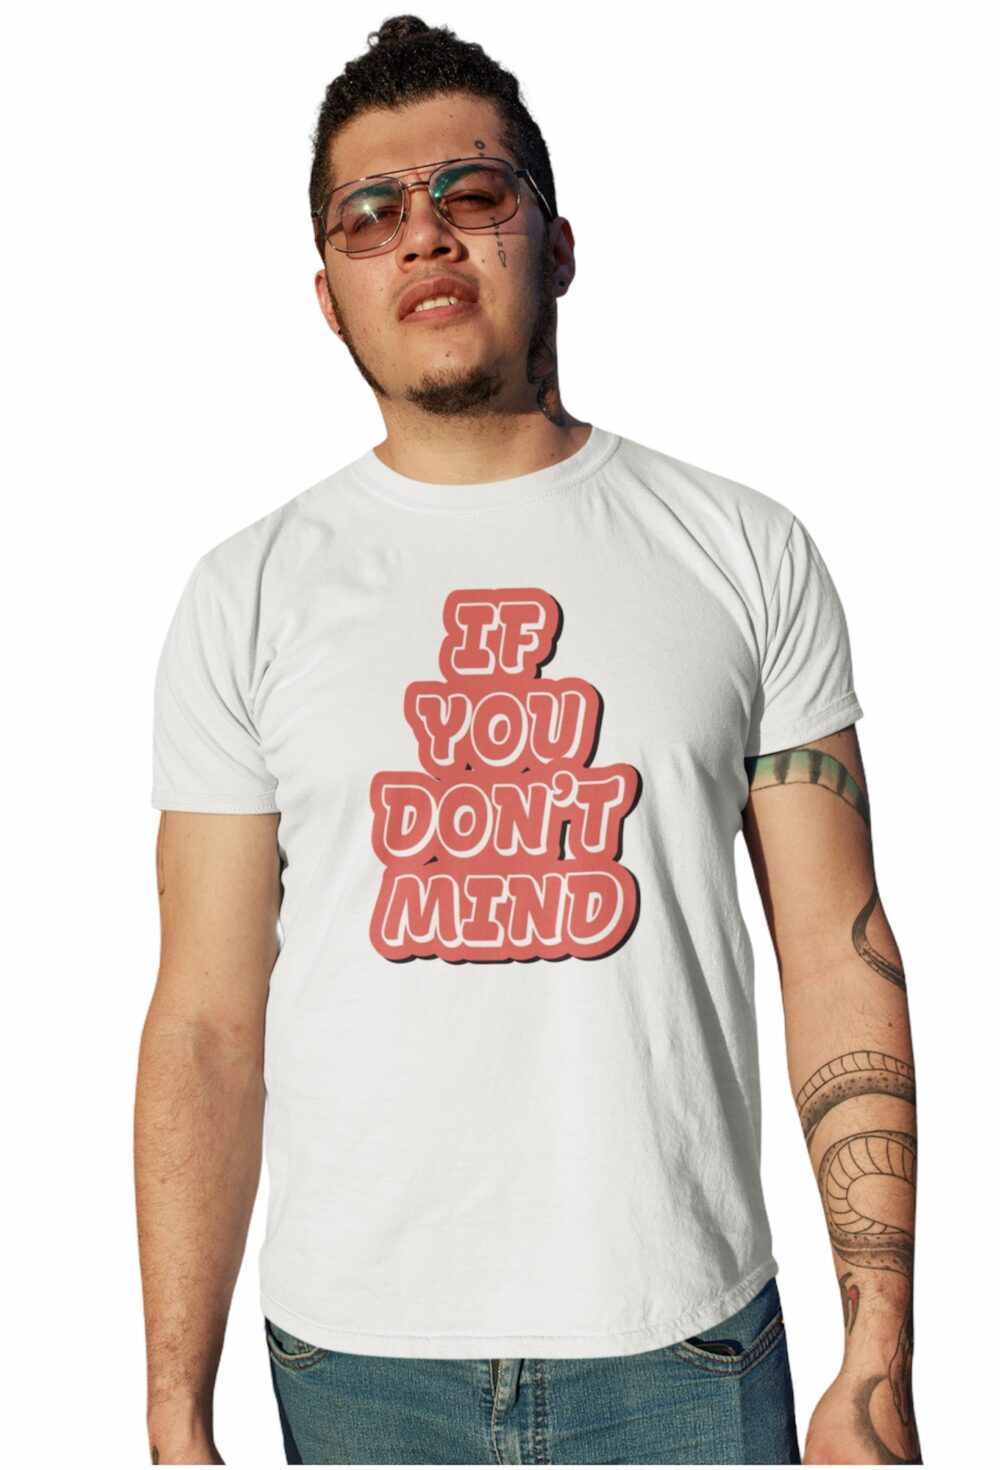 If you Don’t Mind Graphic Online T shirt